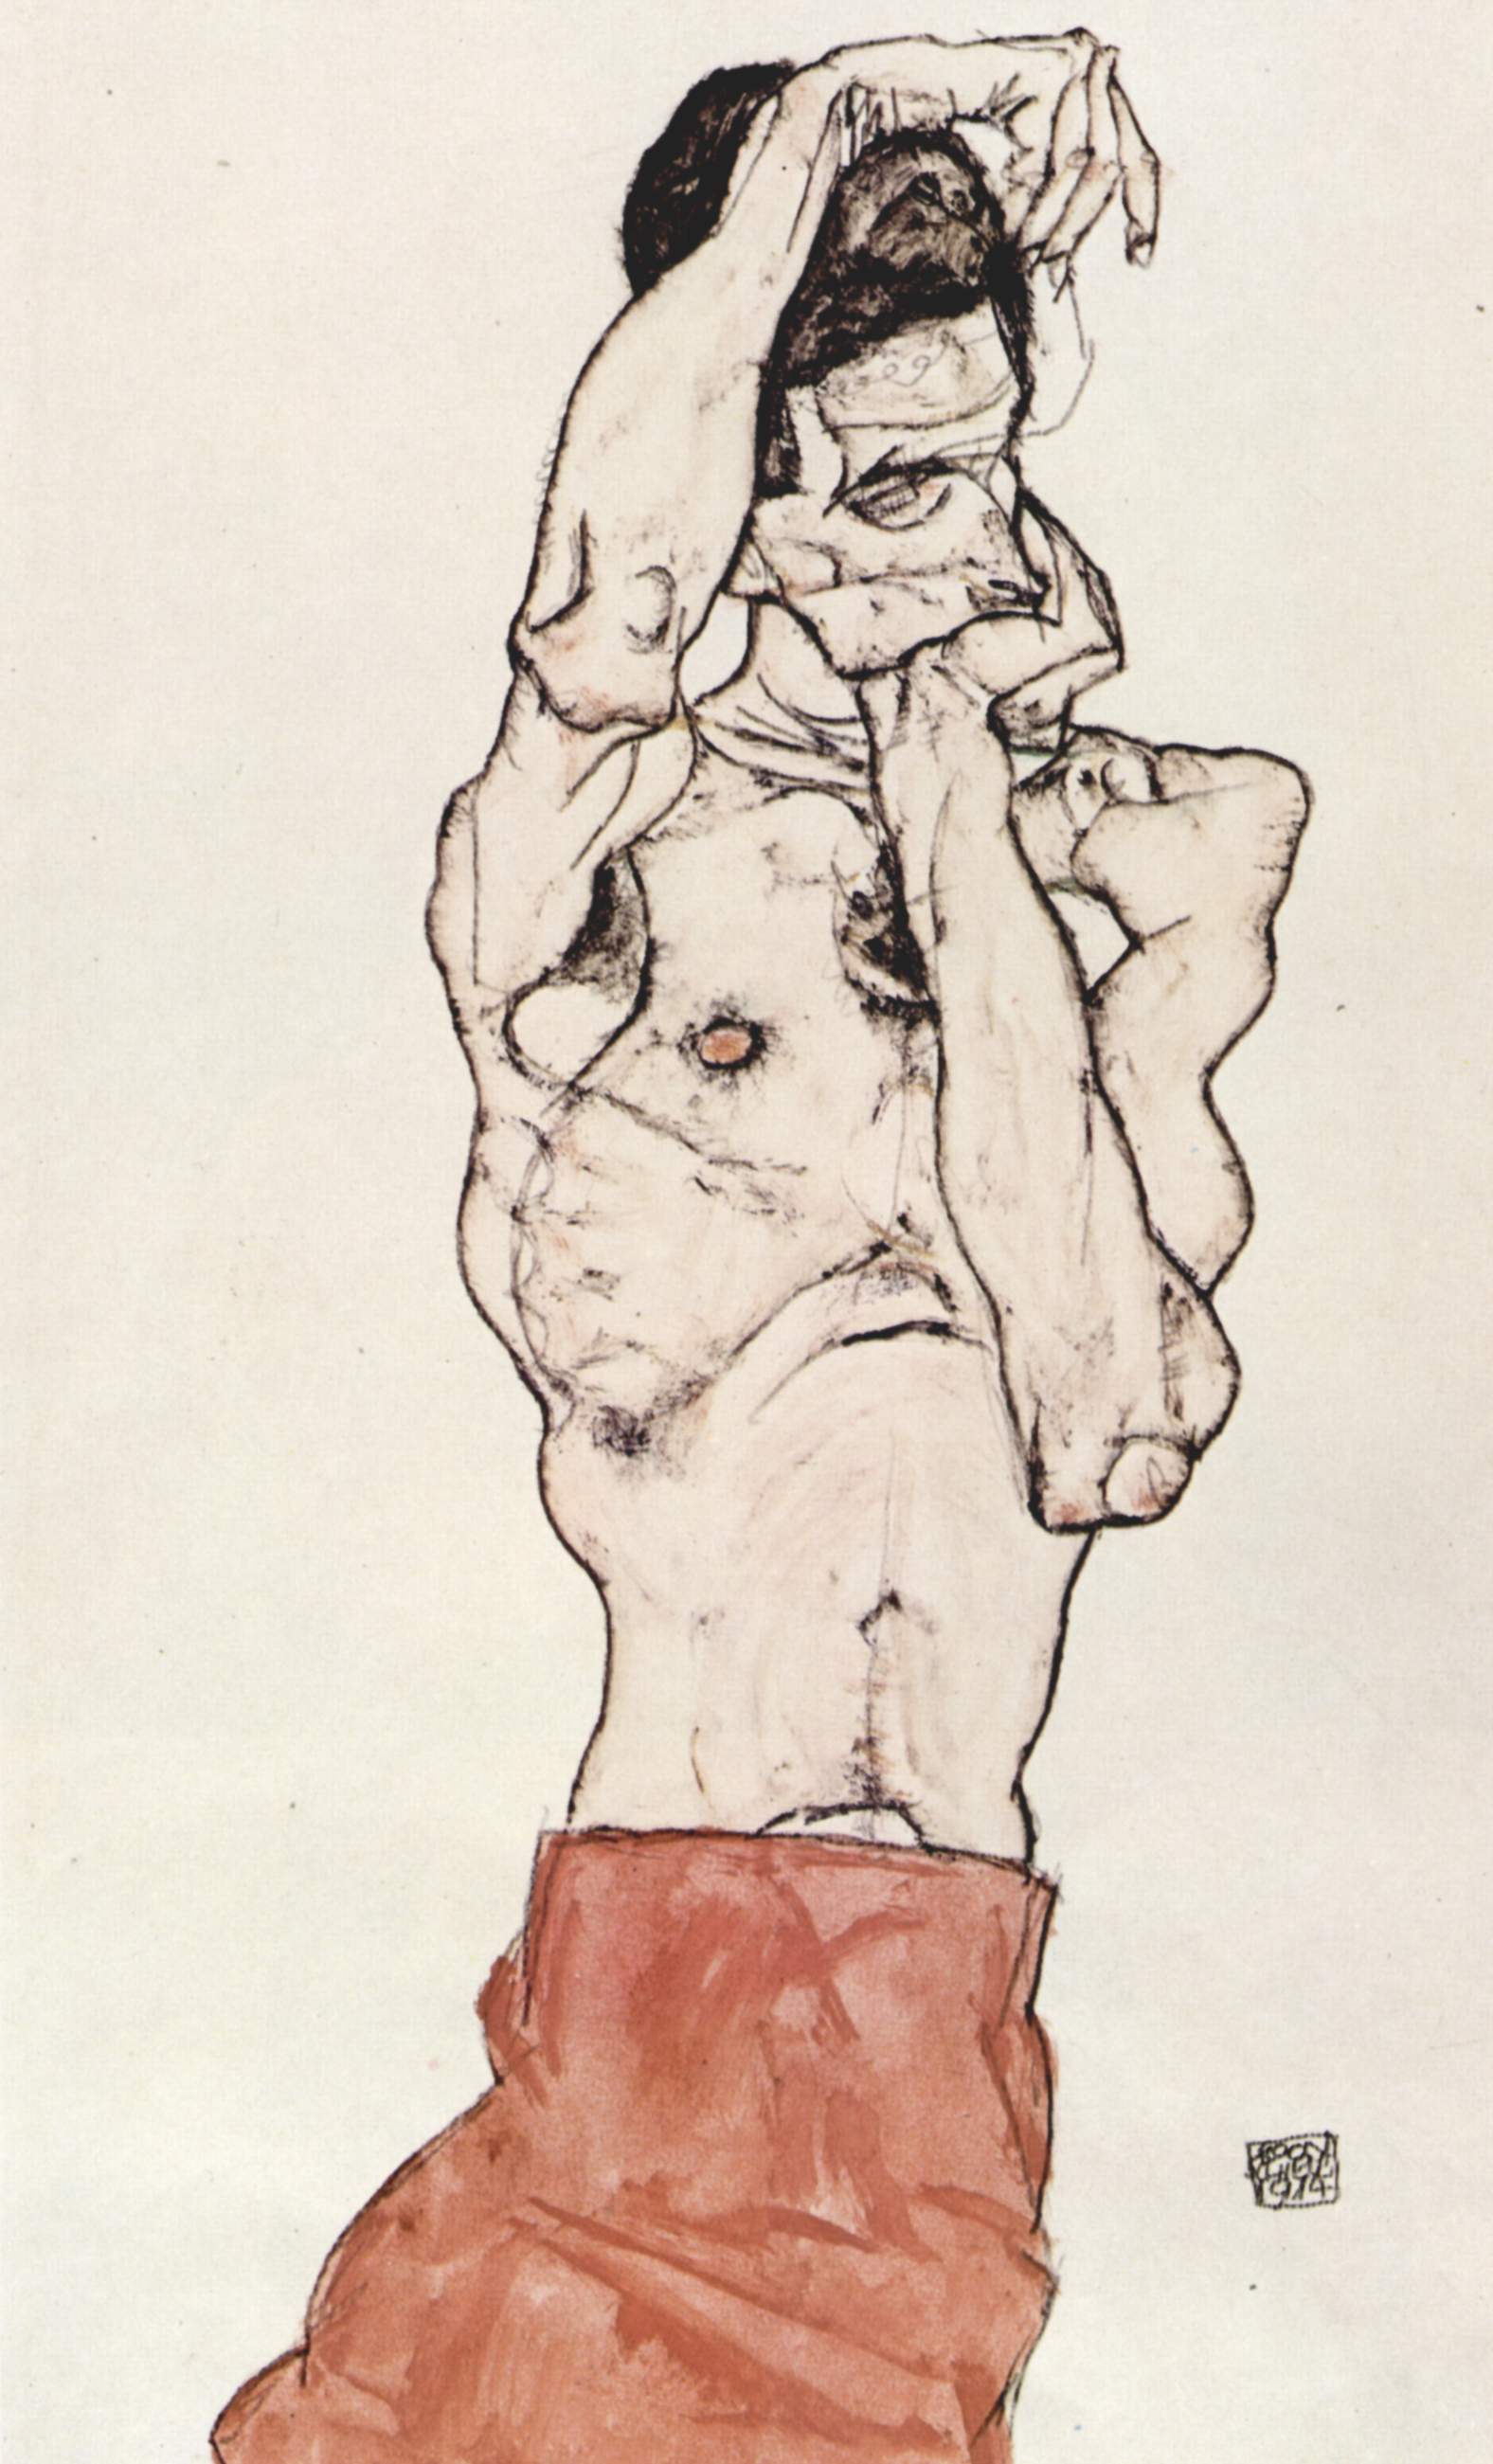  I've spent far too much time studying how Egon Schiele draws hands. 